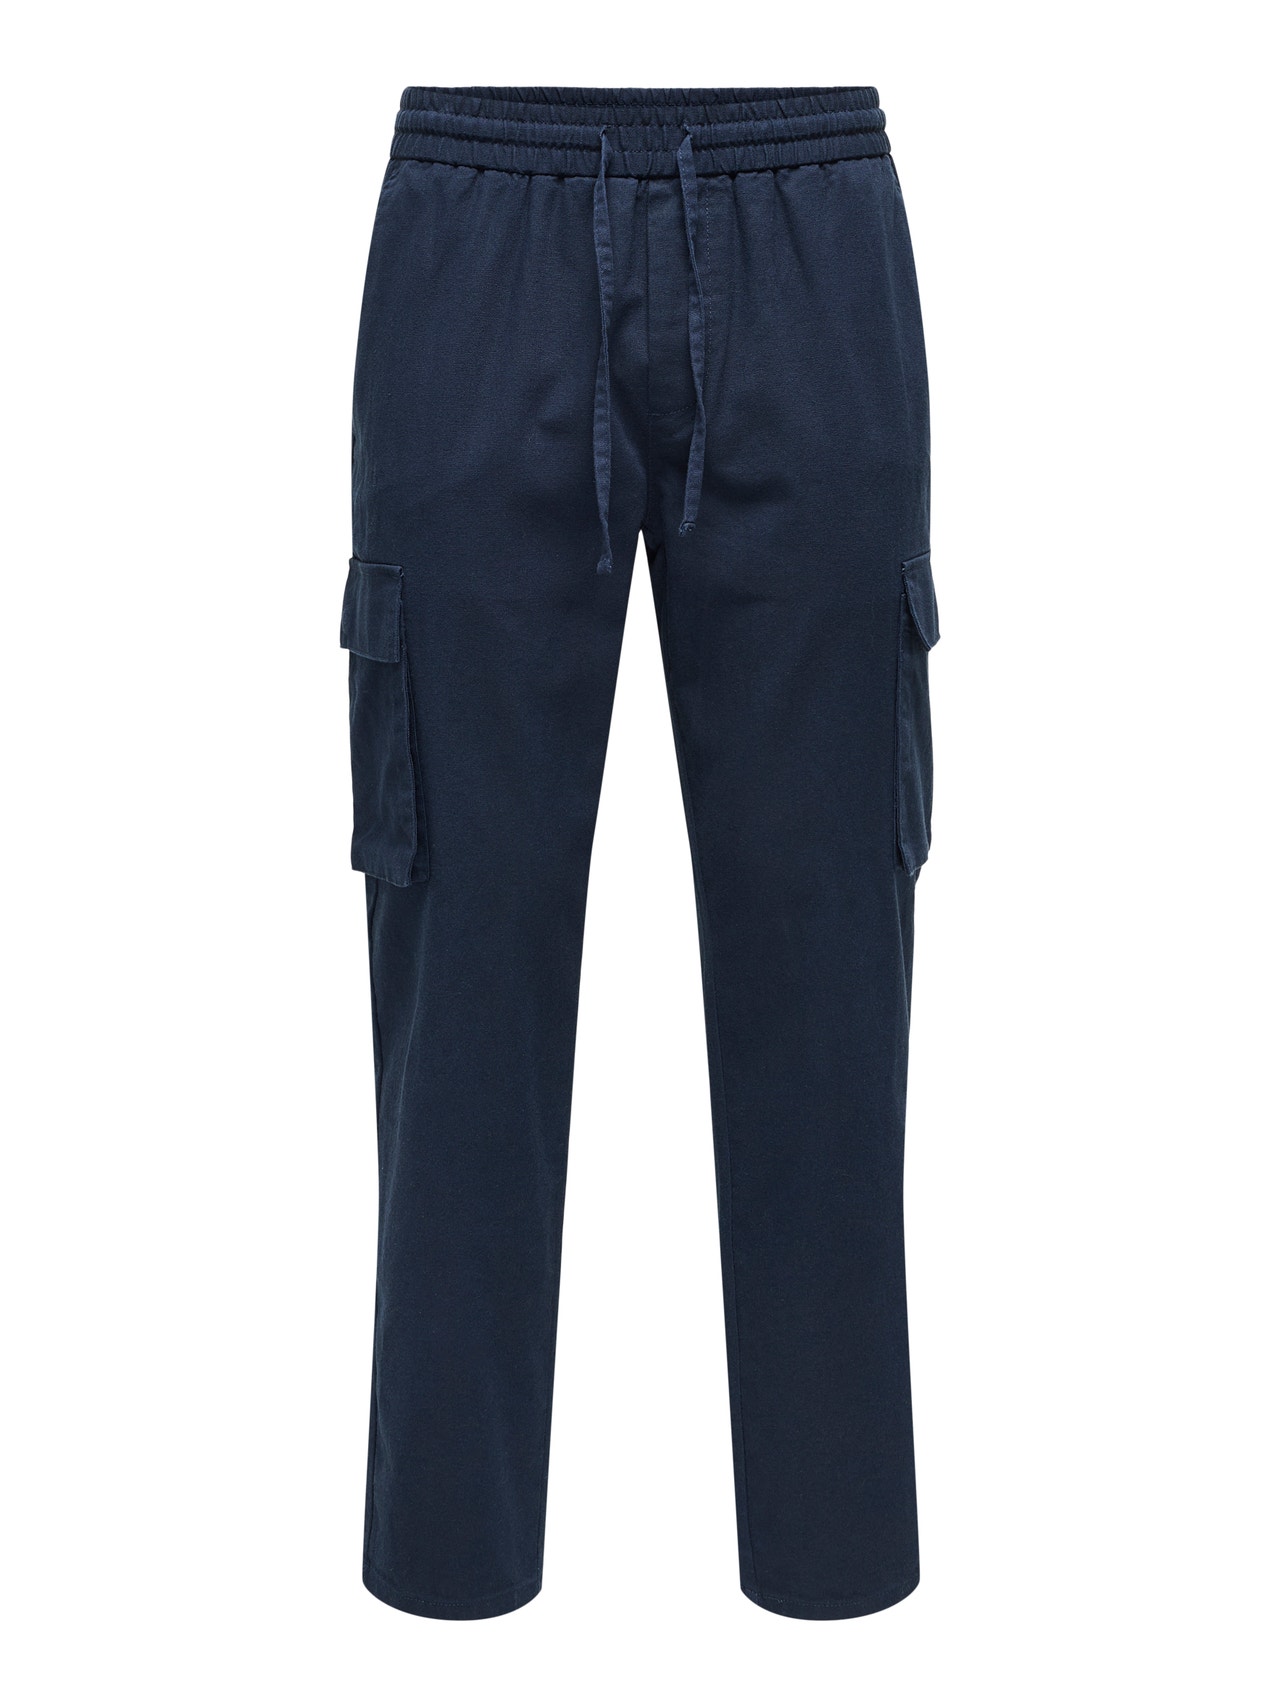 ONLY & SONS Cargo pants -Dark Navy - 22028268